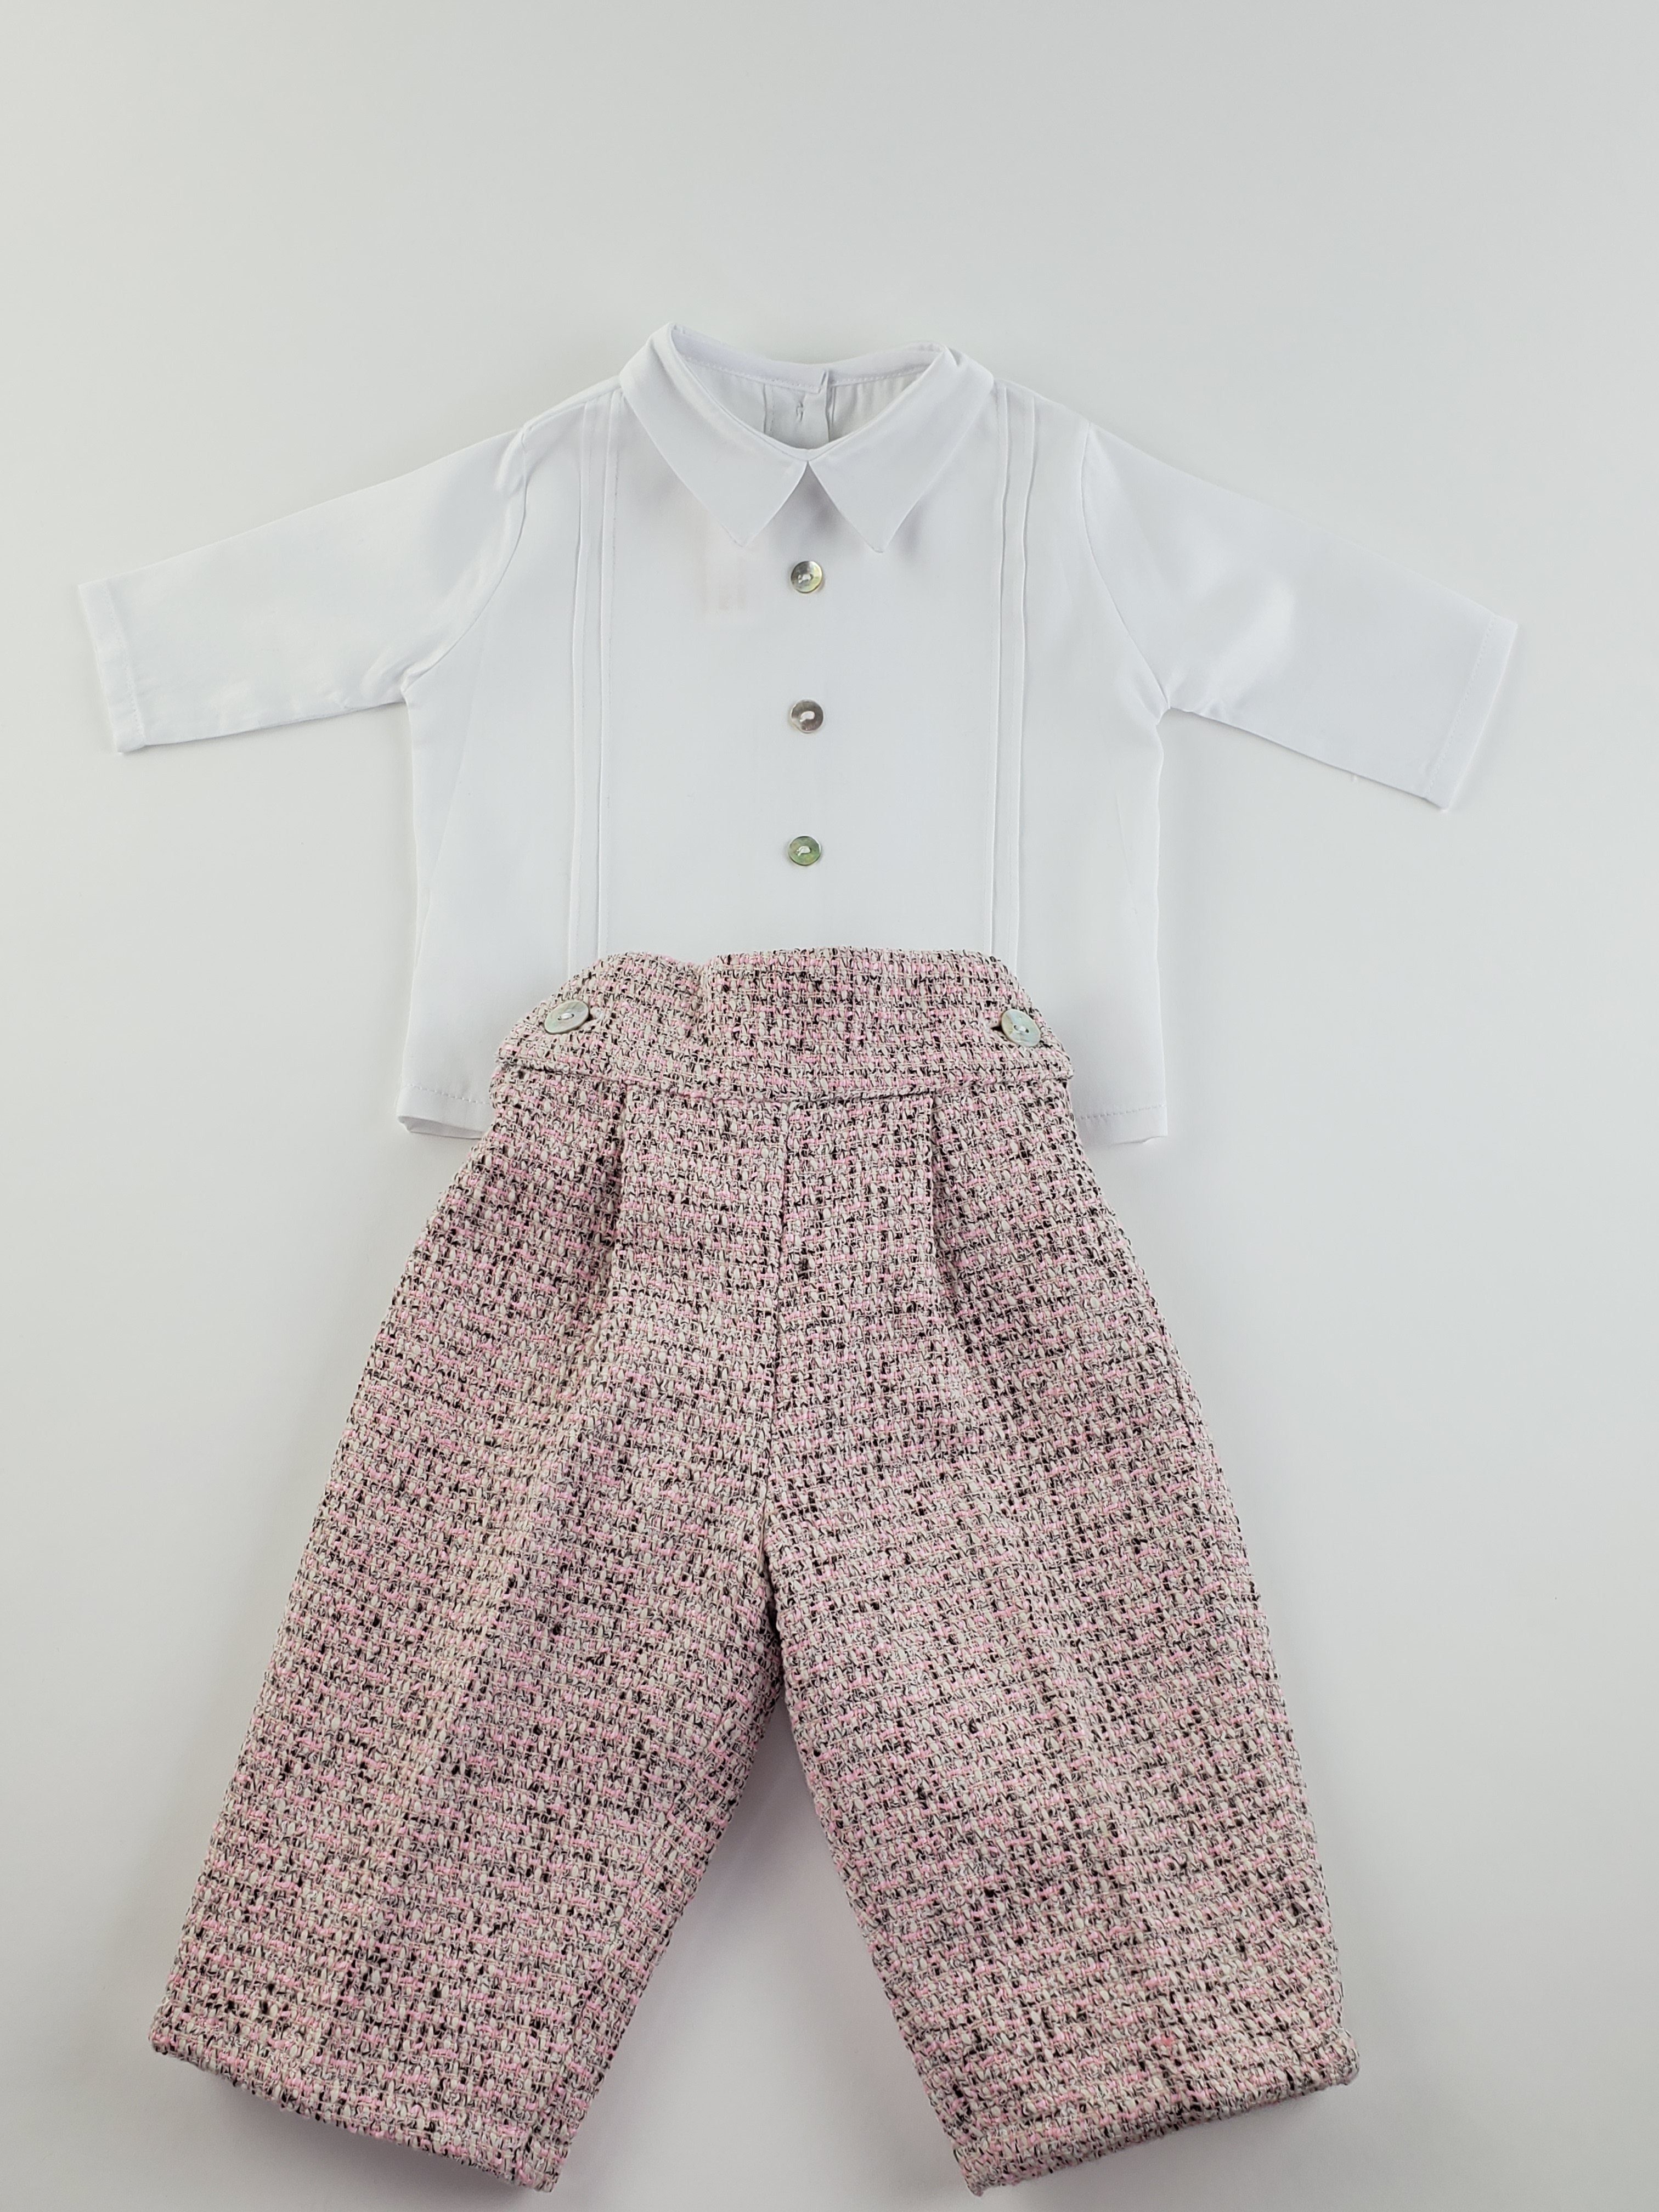 Long Sleeve White Cotton Shirt & Pink Tweed Wool Trousers Set-Boy's Clothing-Boy's Clothing Store Shirt & Pants Set Alfa Baby Boutique 0-3 Pink Male